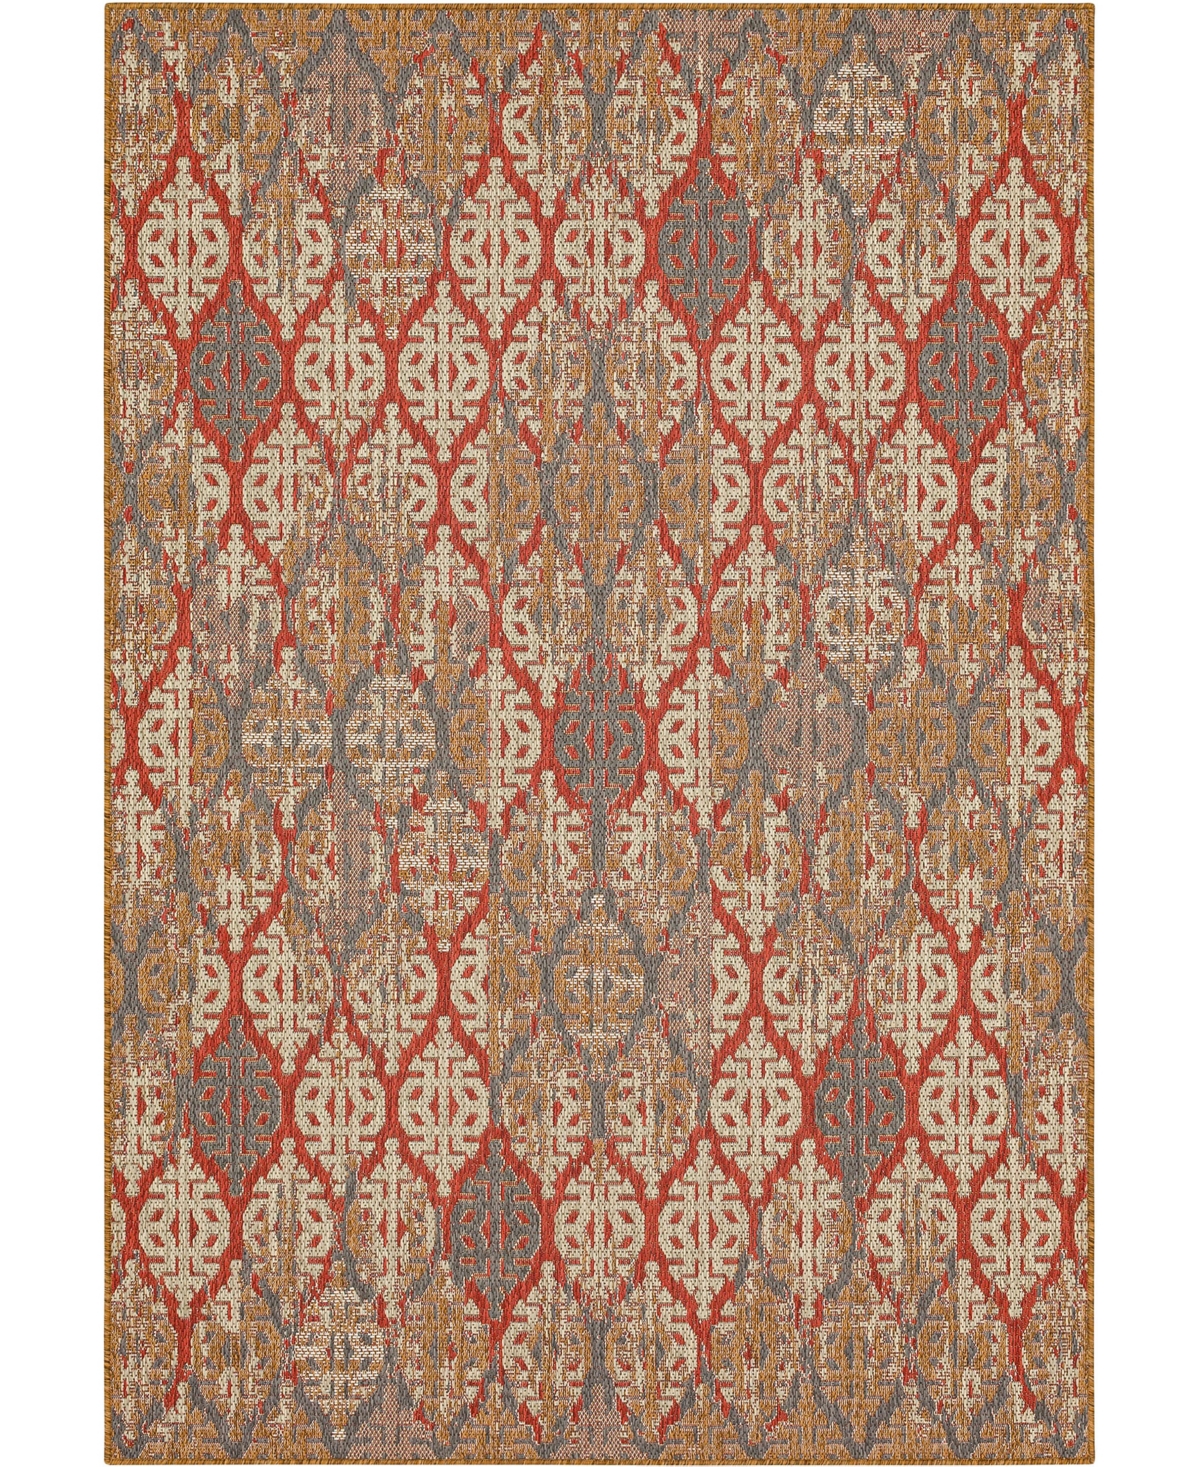 Mohawk Malibu Outdoor Stamped Ikat 4' X 5'6" Area Rug In Red